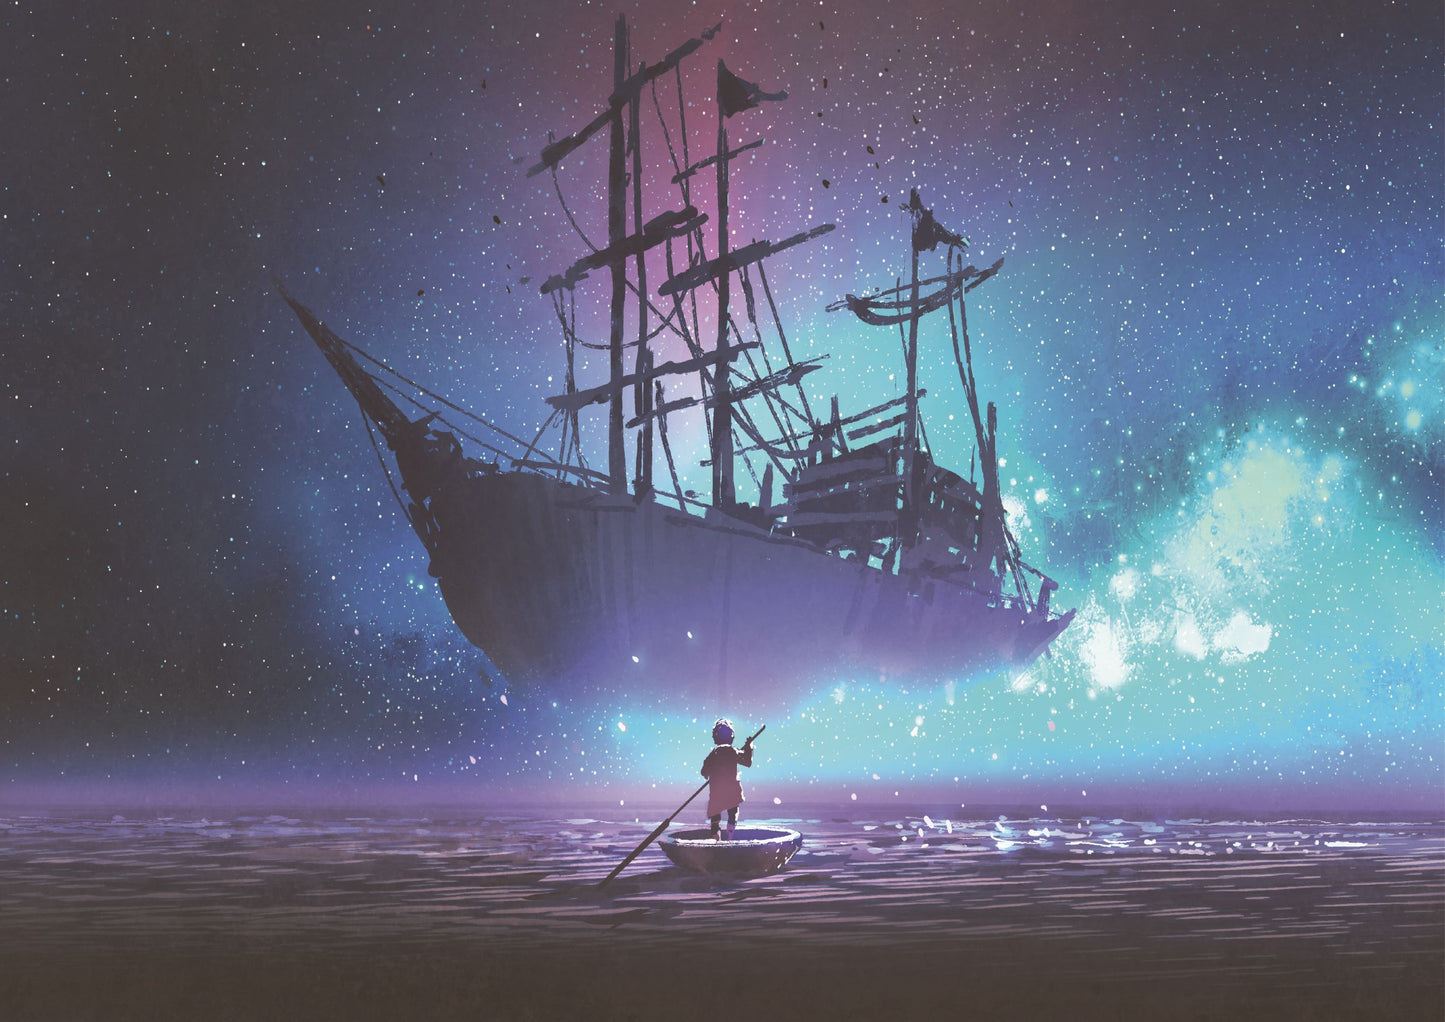 Little boy rowing a boat in the sea and looking at the sailing ship floating in starry sky